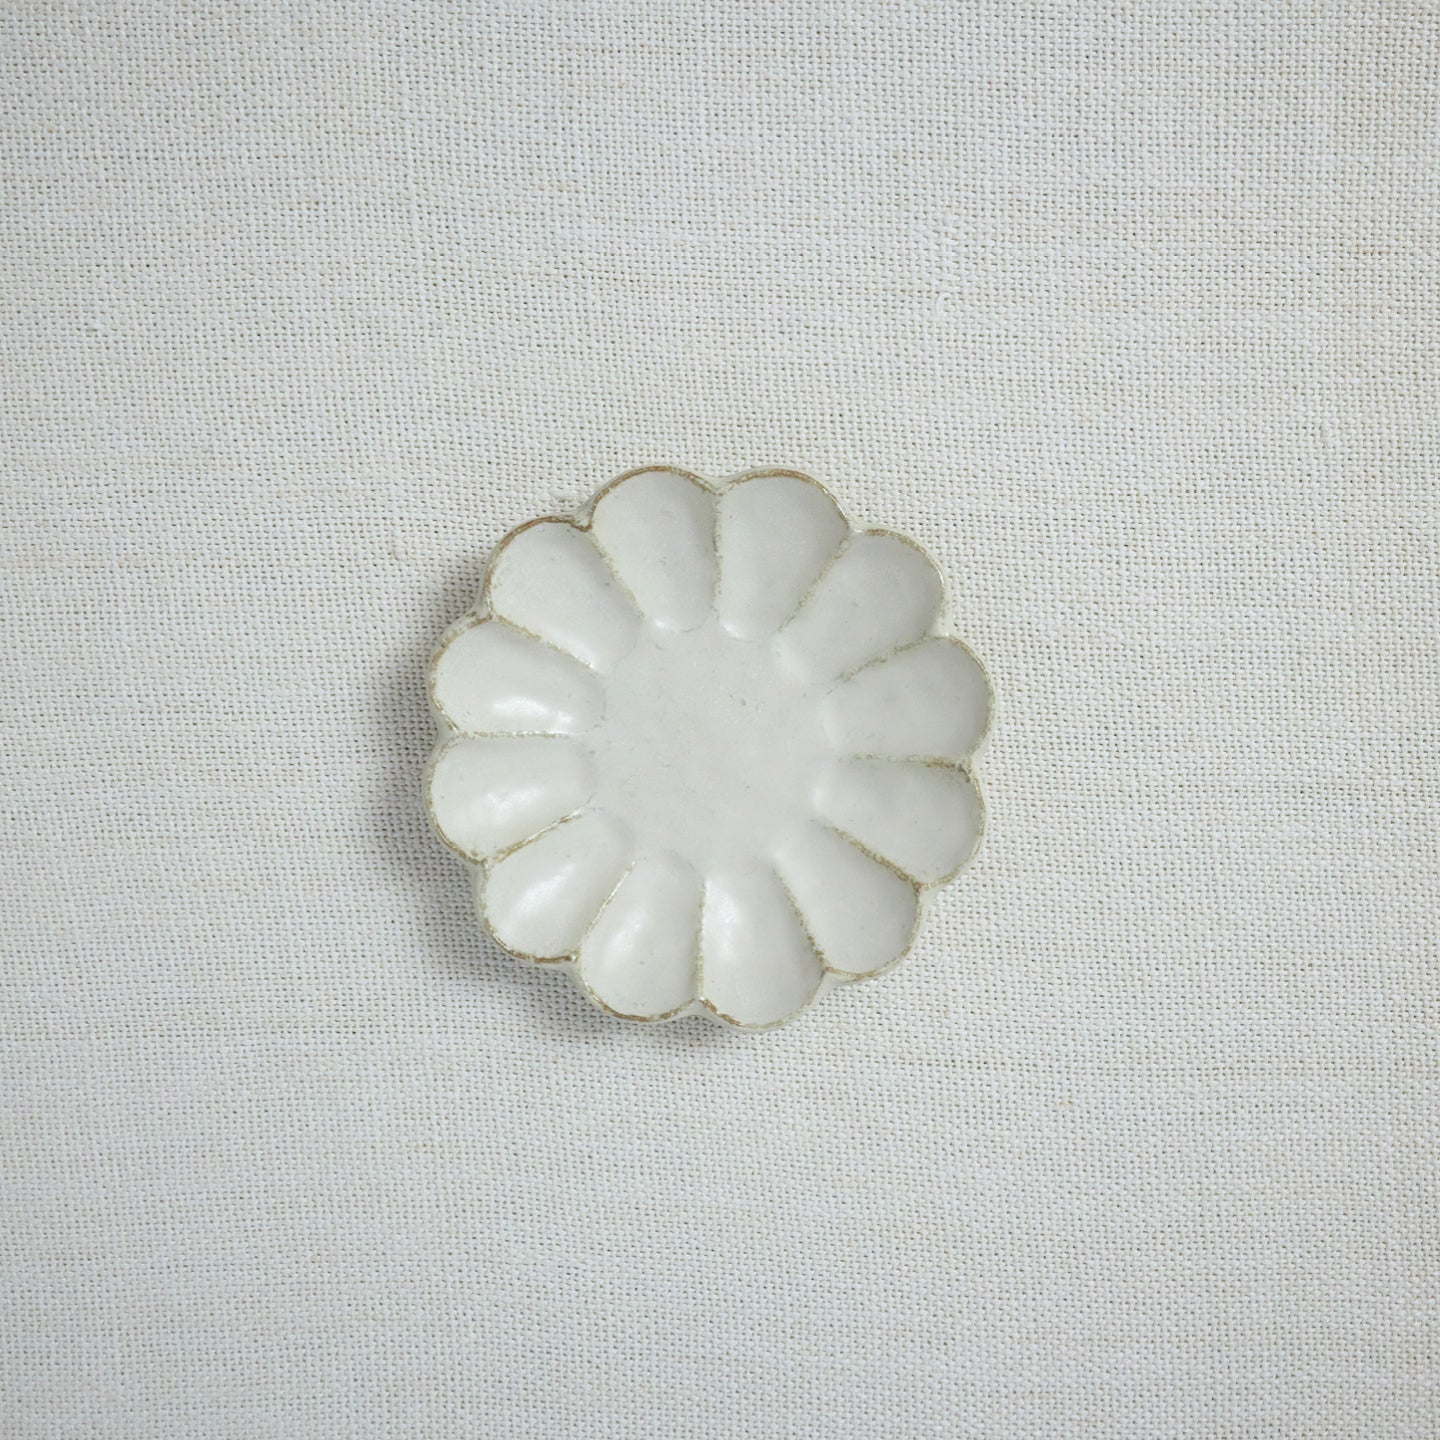 Analogue Knitting Row Counter White Flower